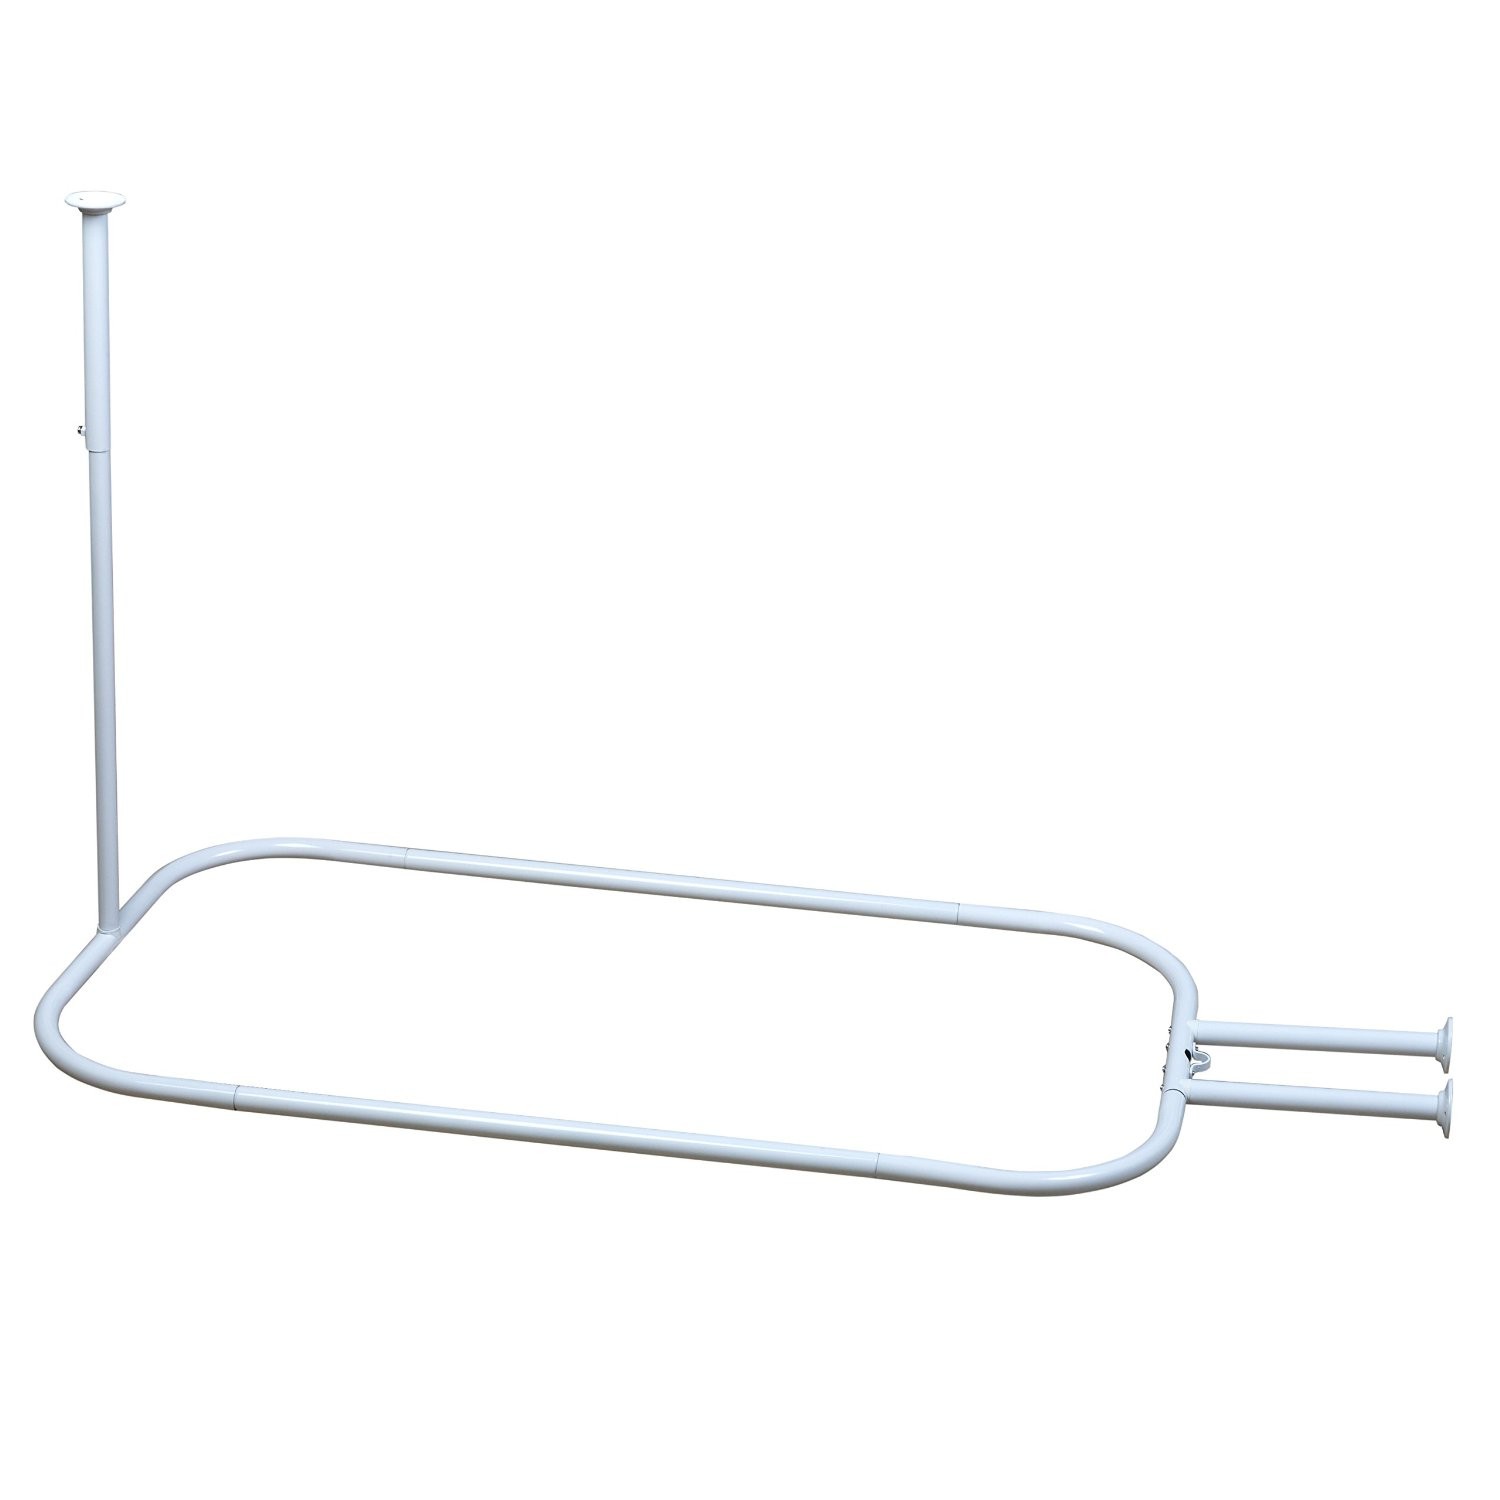 Hoop Shaped Shower Curtain Rod for Claw Foot Tubs in White